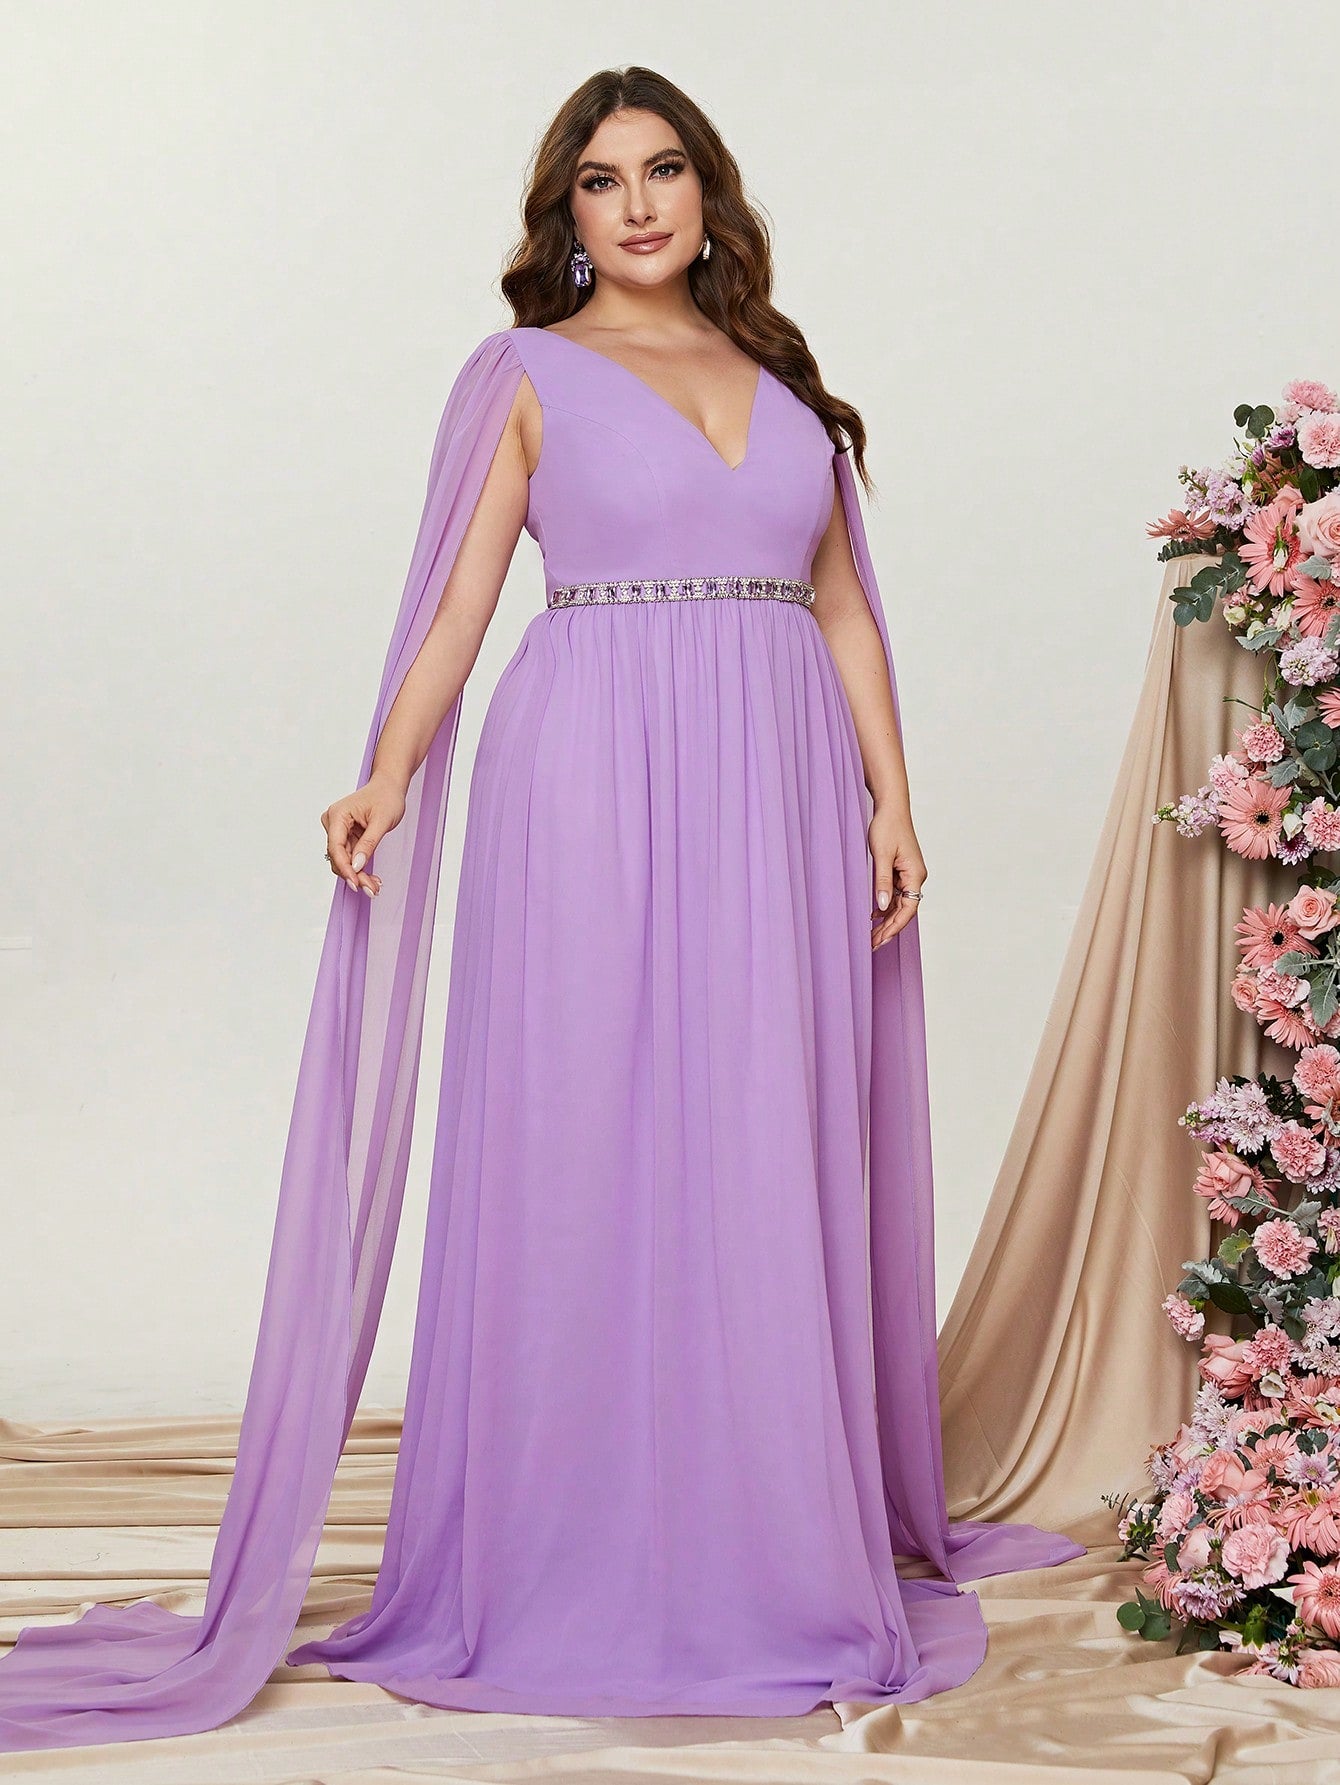 Plus Plunging Neck Rhinestone Waistband A Line Dress With Cape